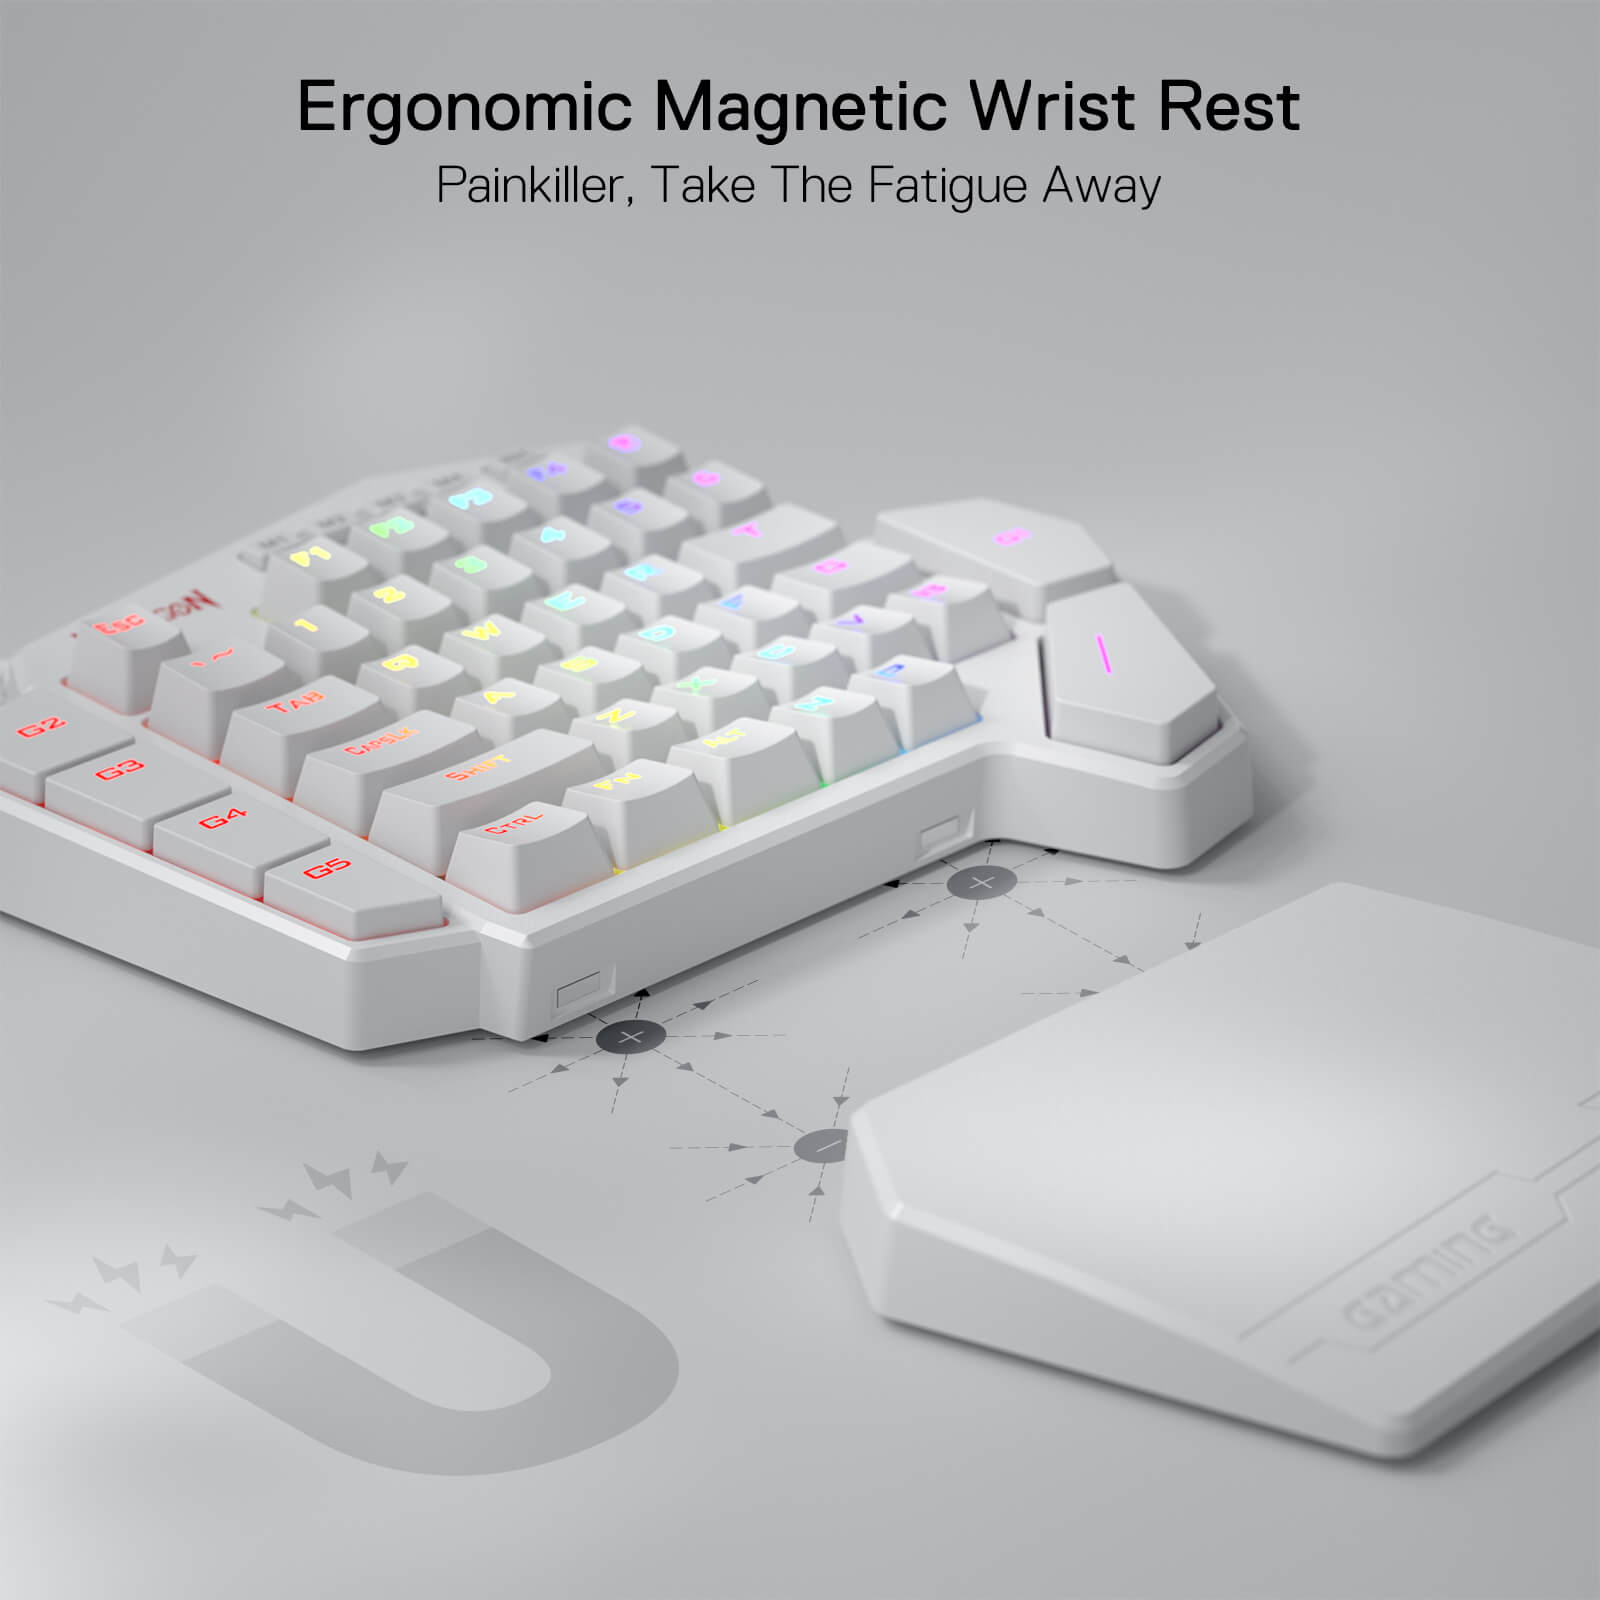 T1 Wired One Handed Gaming Keyboard Mouse Combo Ergonomic Multicolor  Backlight One-Handed Game Keyboard Mouse Set For PC